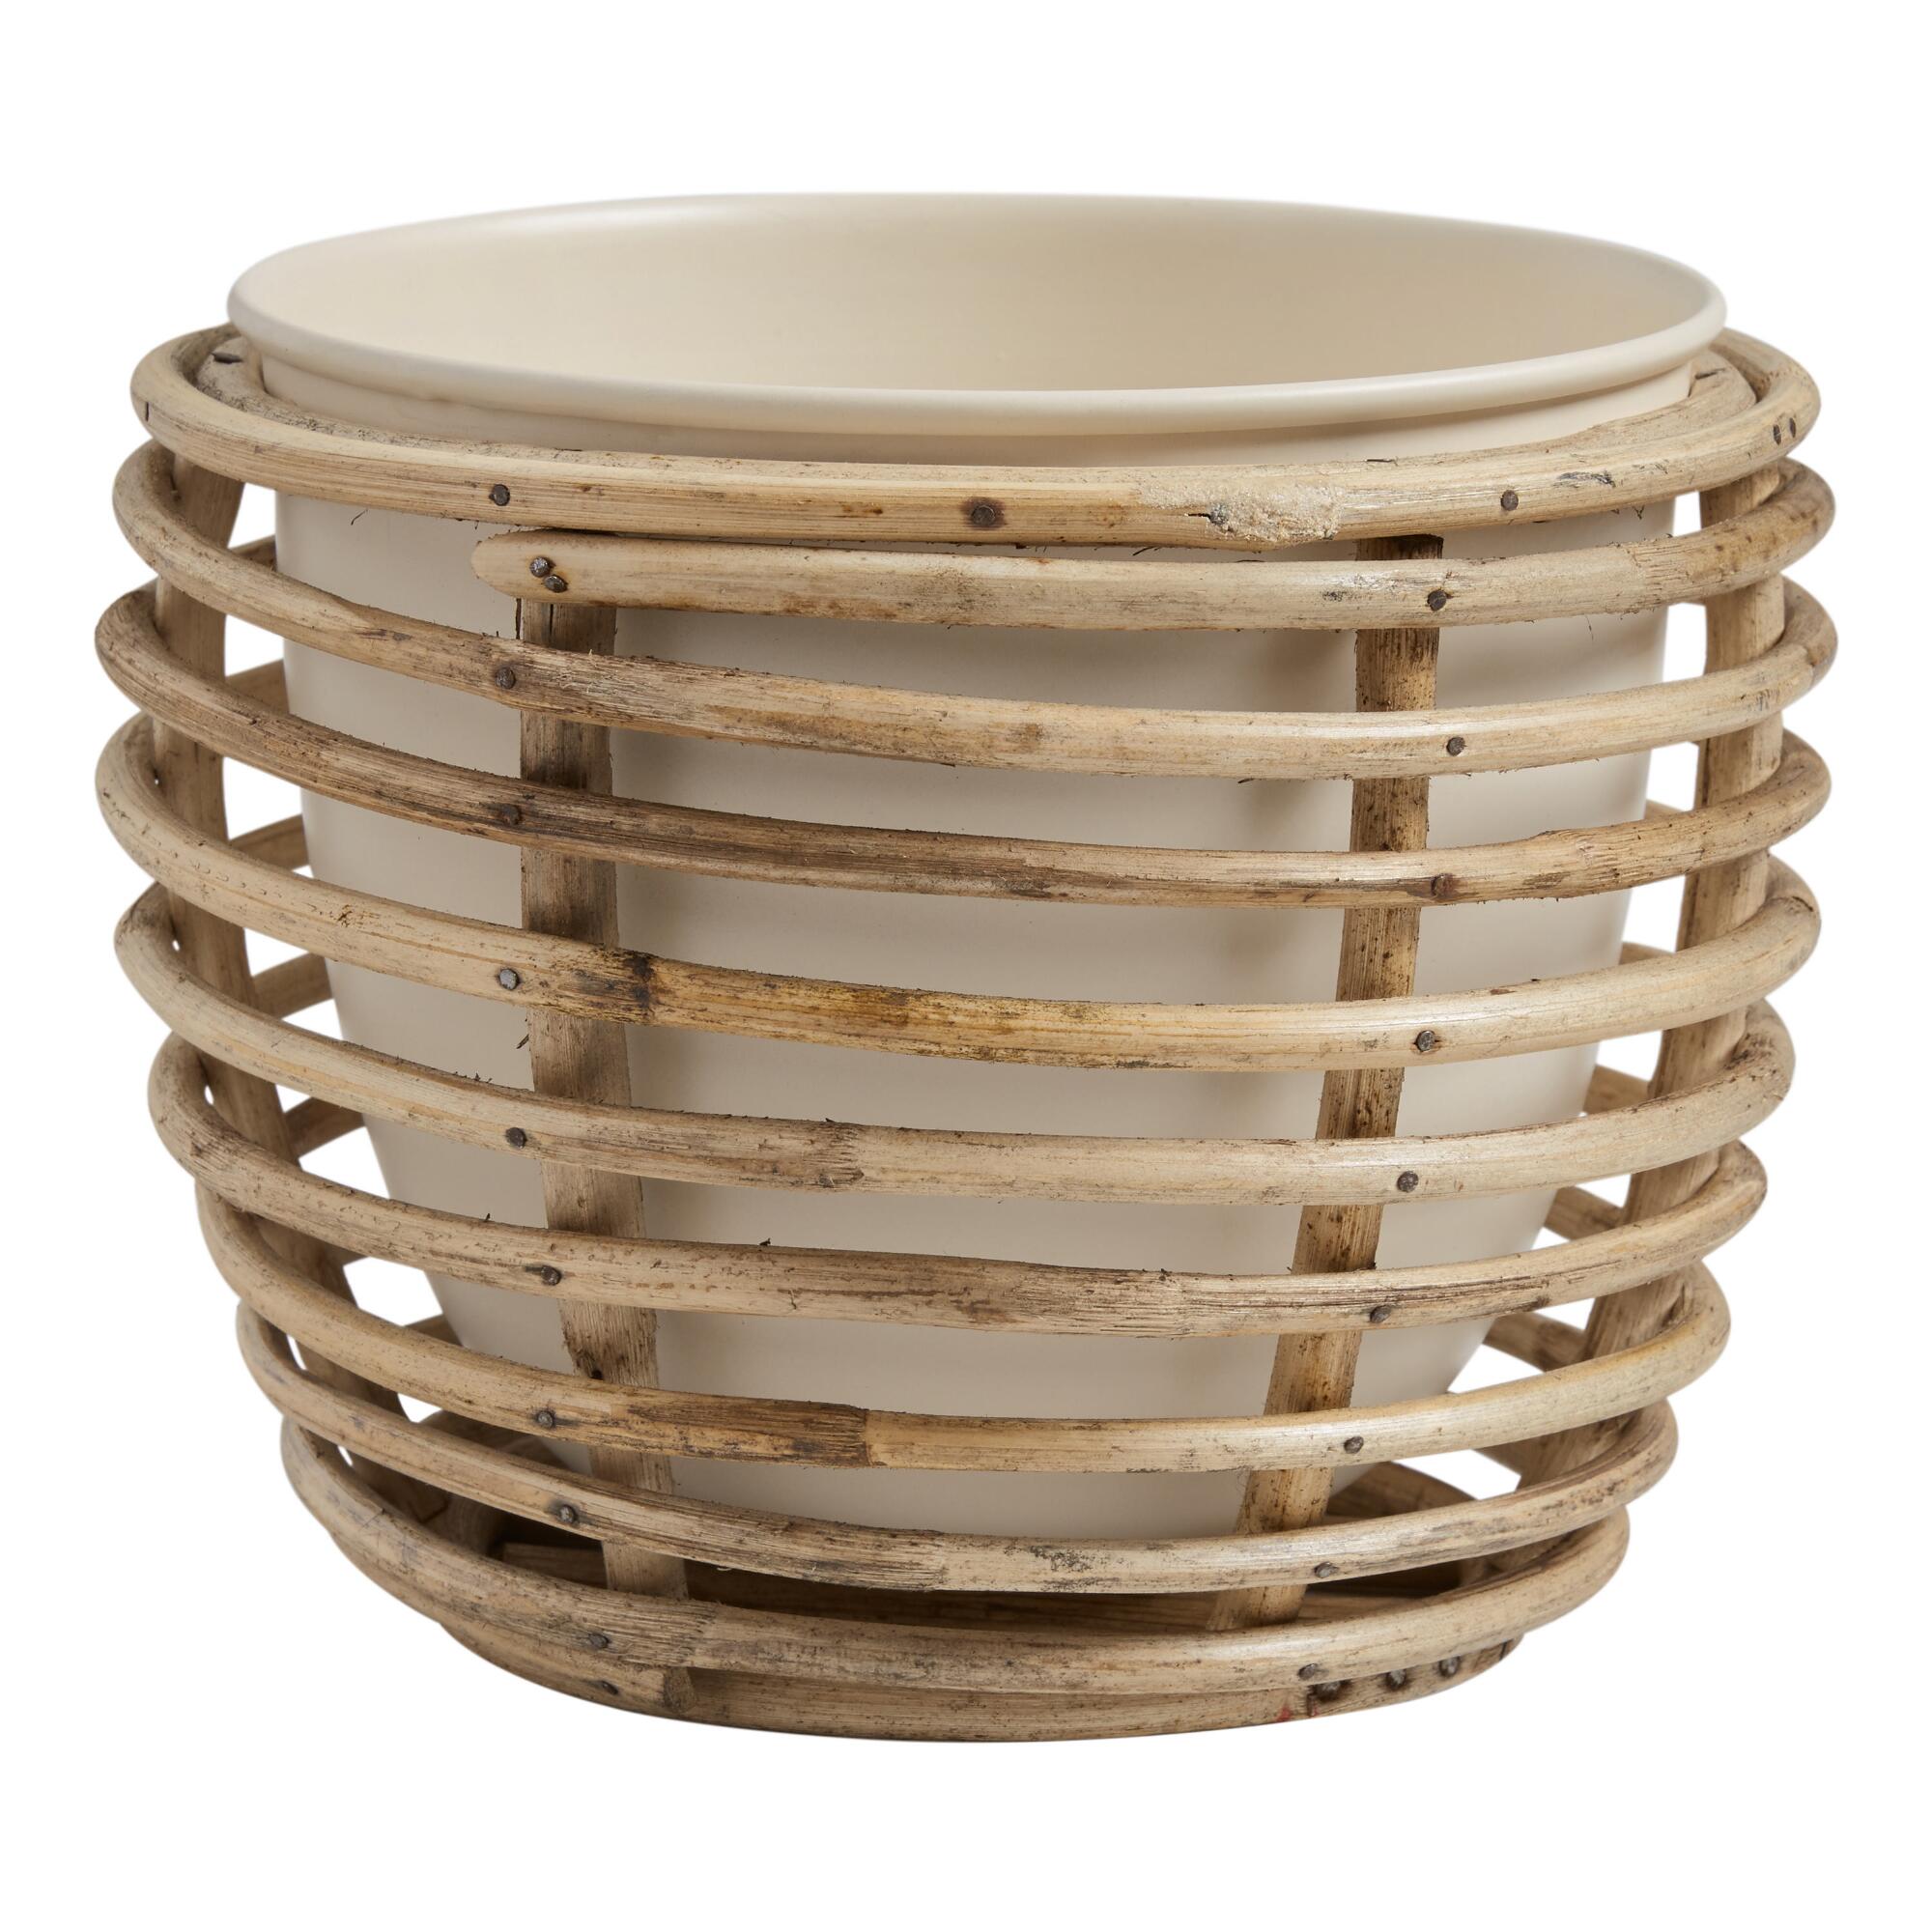 Ivory Metal Planter with Rattan Cane Stand by World Market